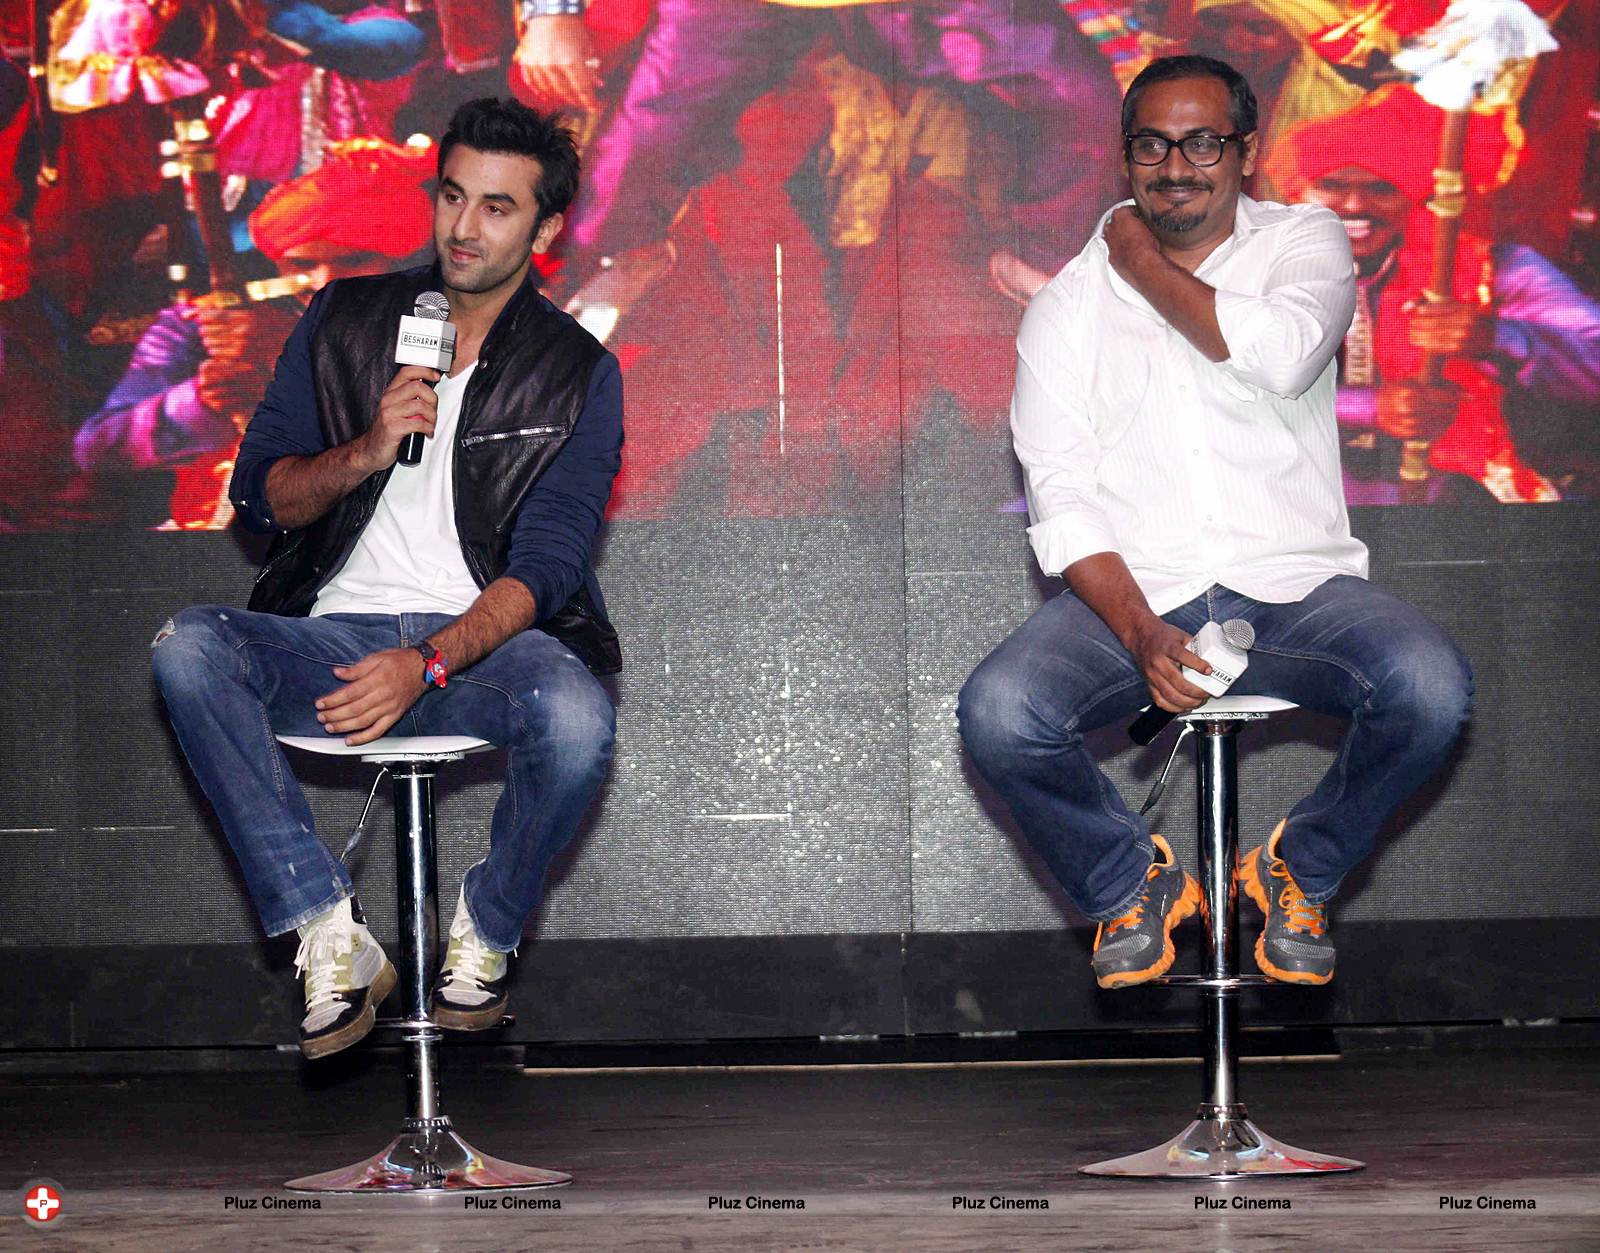 Ranbir Kapoor - Launch of song Aare Aare from film Besharam Photos | Picture 565338